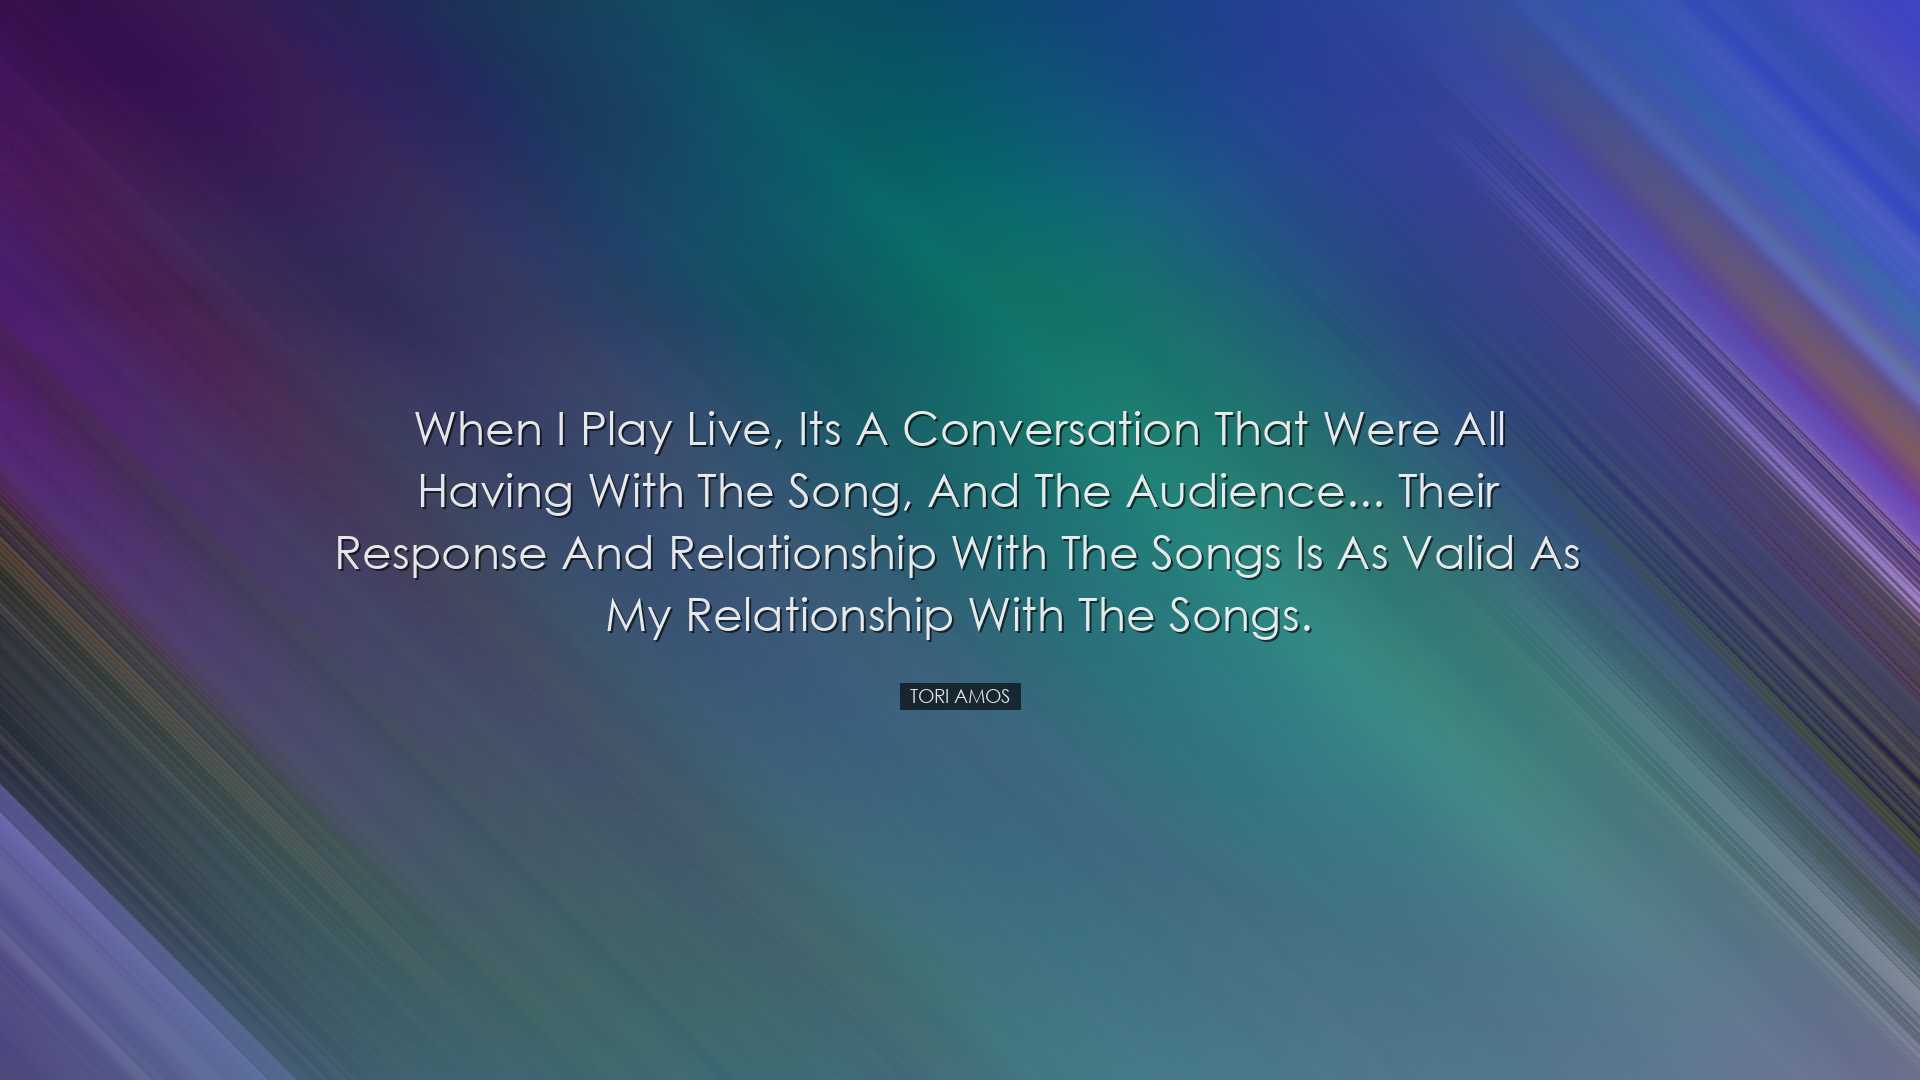 When I play live, its a conversation that were all having with the